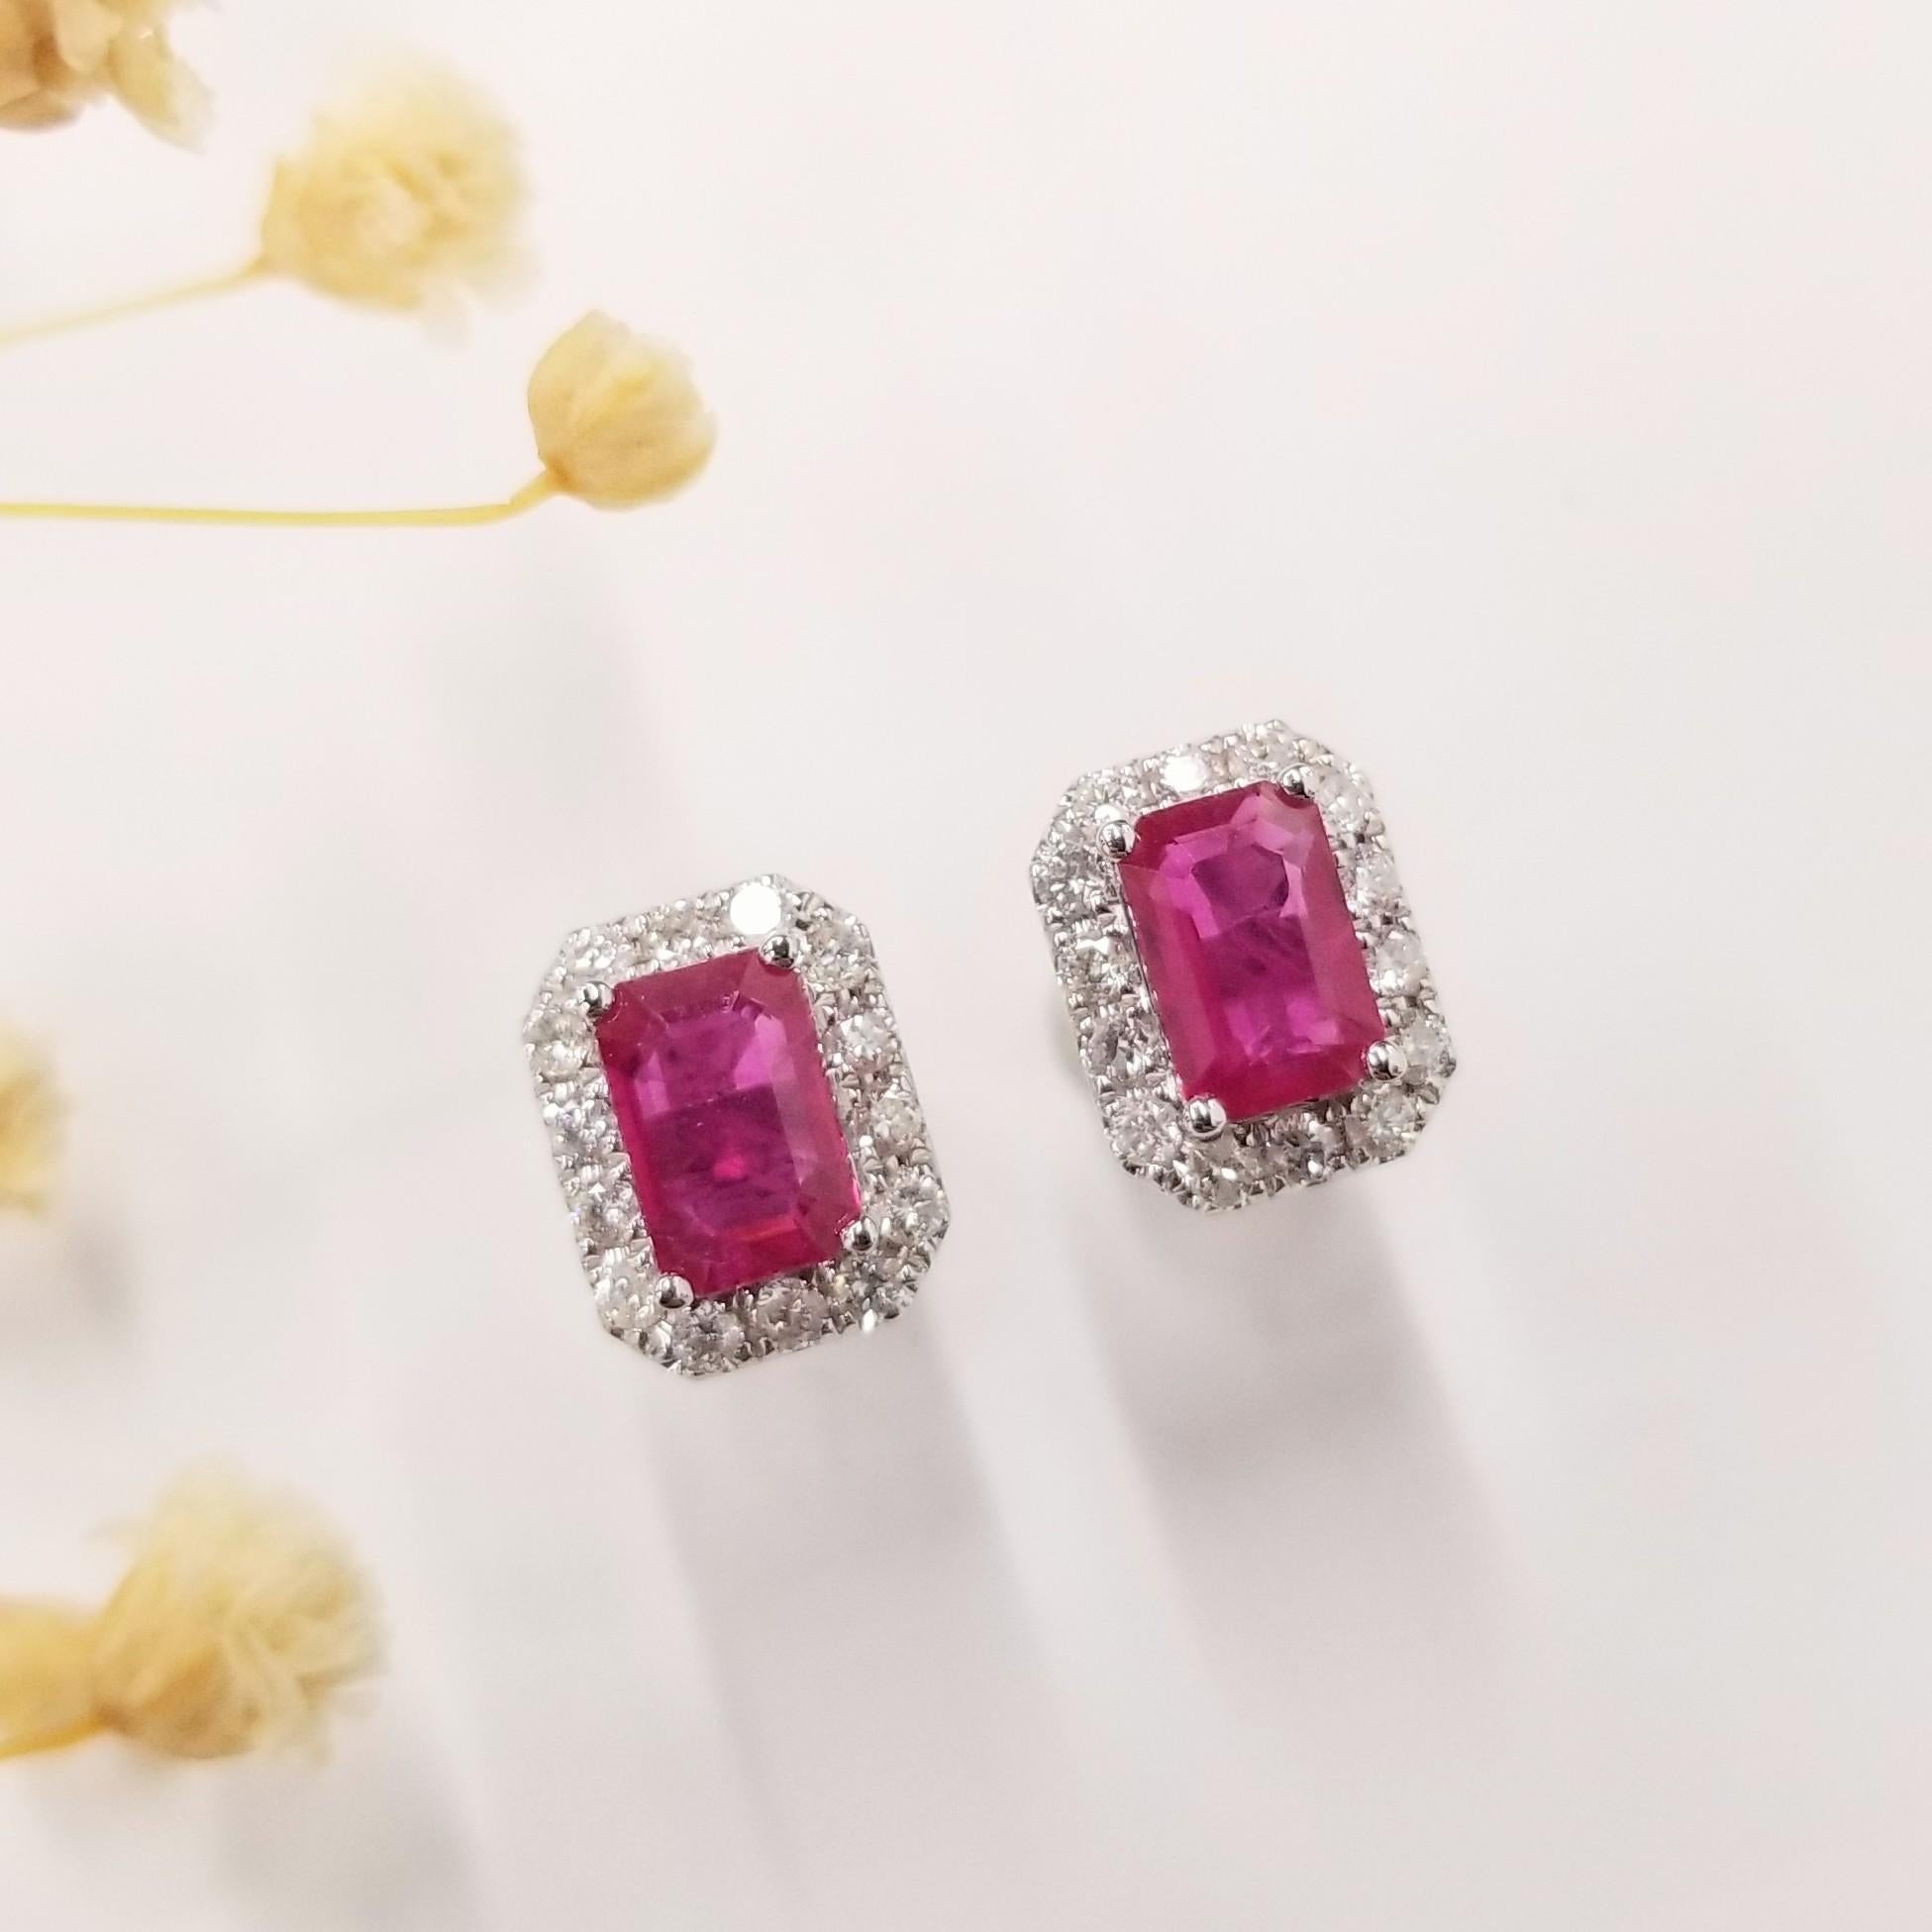 IGI Certified 1.44 Carat Ruby & 0.32 Carat Diamond Earrings in 18K White Gold In New Condition For Sale In KOWLOON, HK